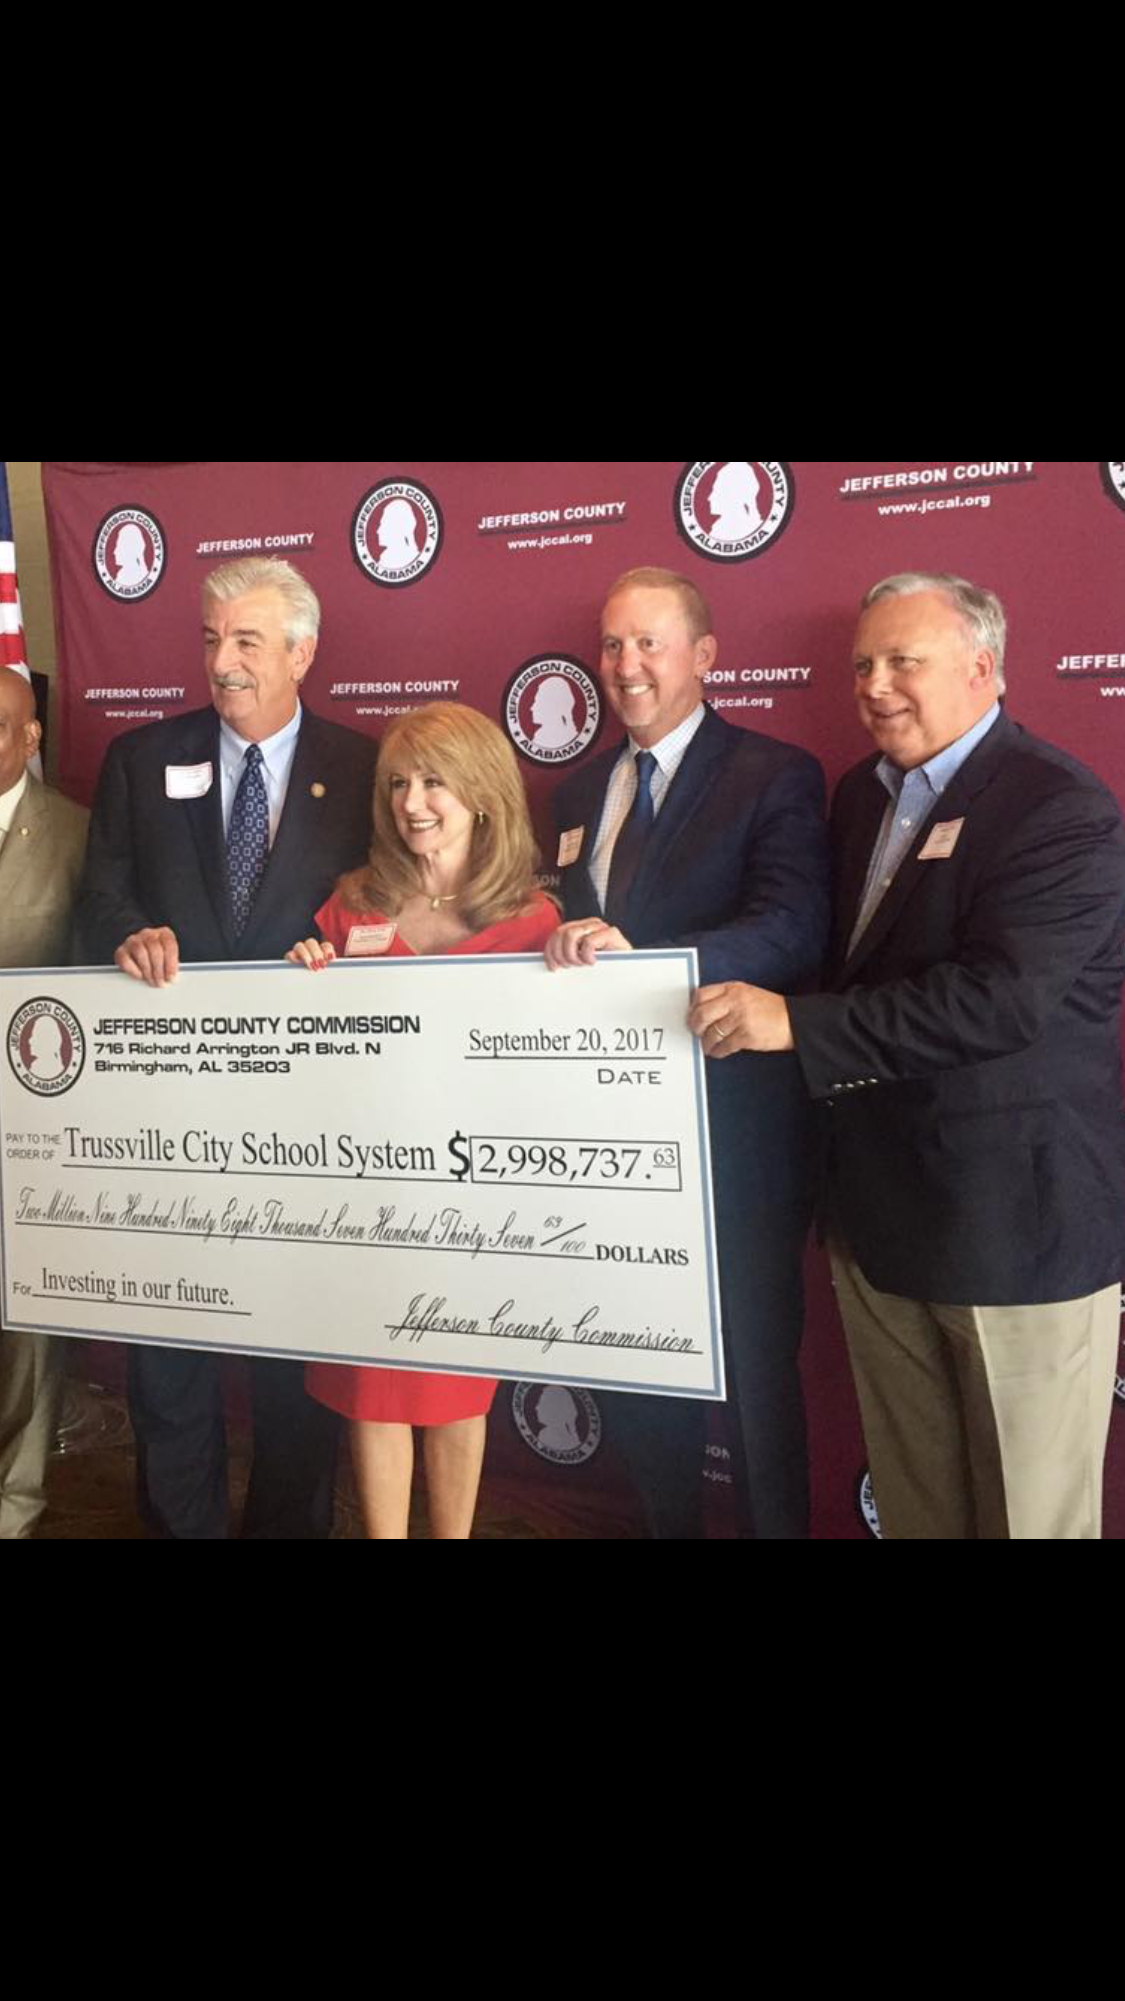 Trussville schools receive almost $3 million from Jefferson County Commission